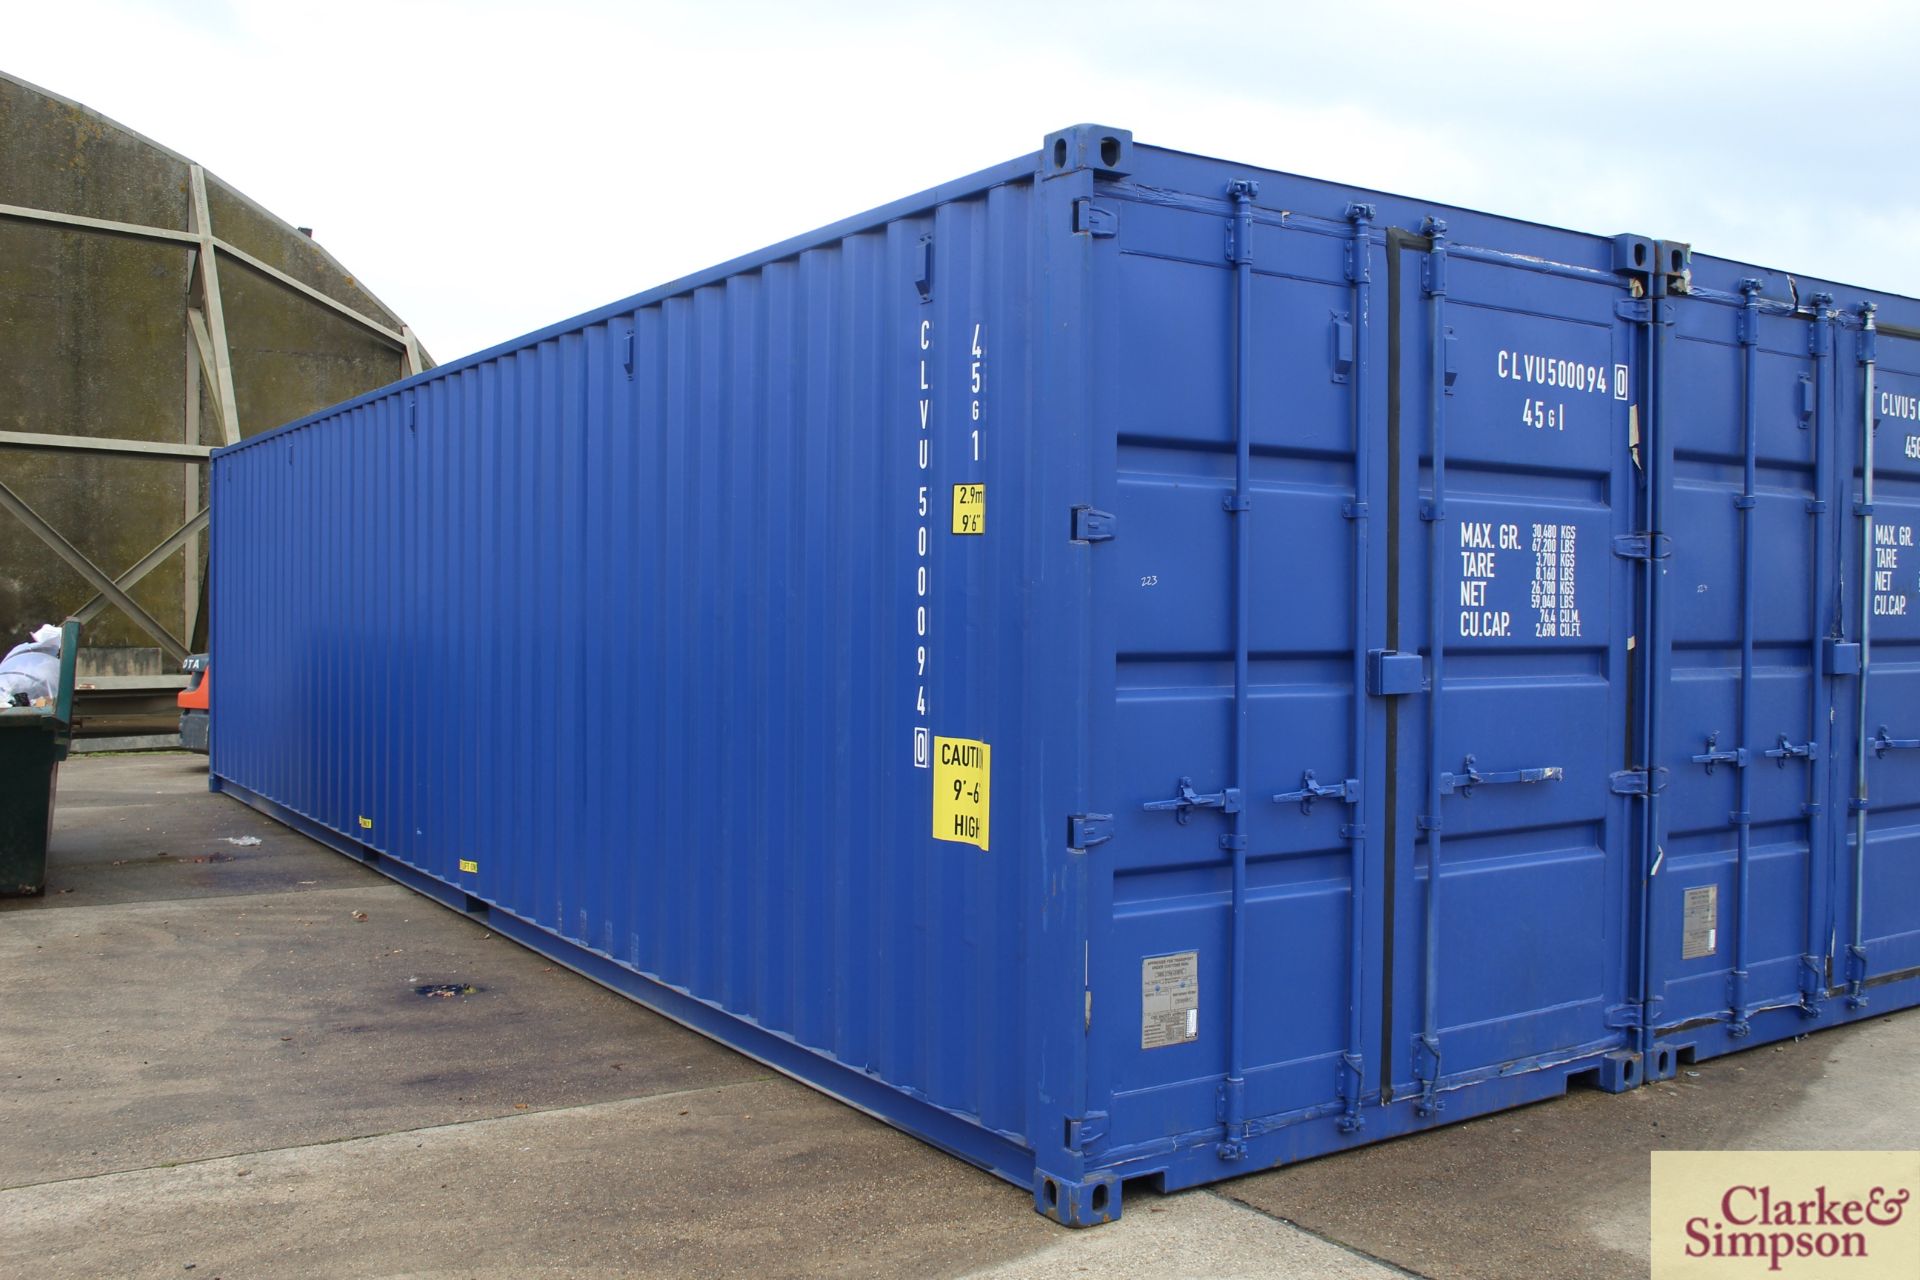 40ft x 9ft6in high shipping container. 2019. Heavily reinforced to interior to include plates